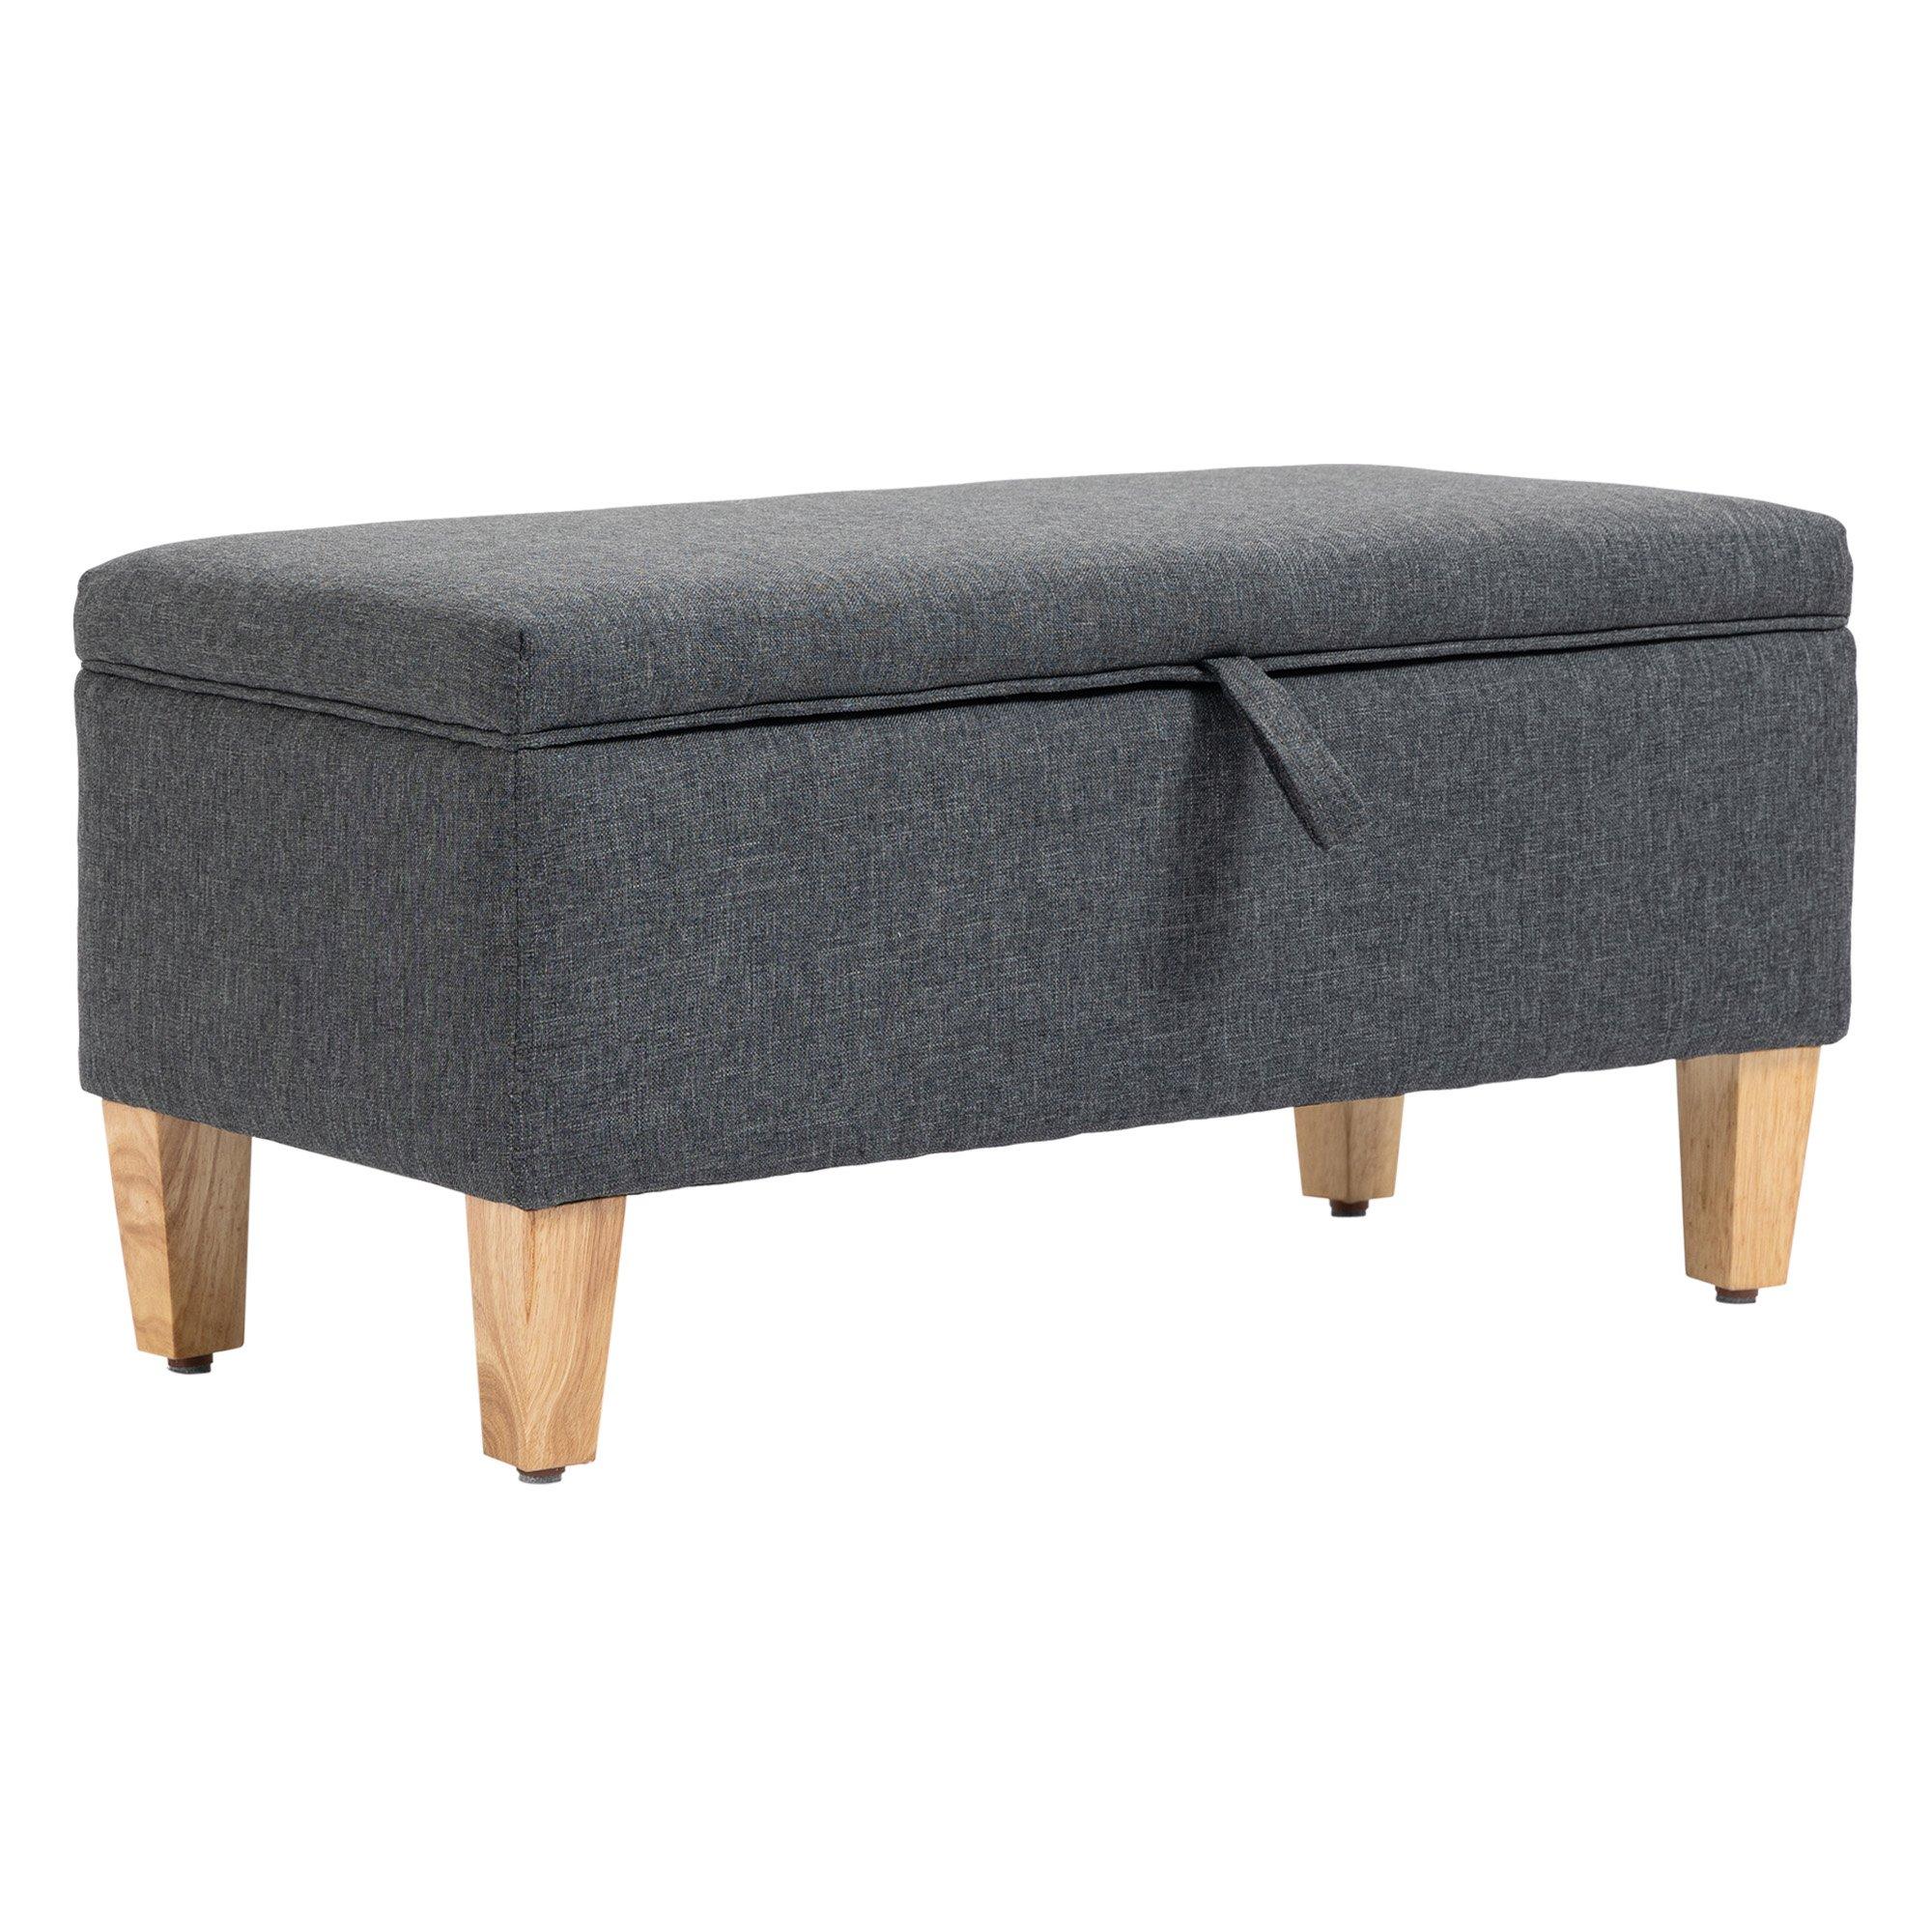 Linen Storage Ottoman Footstool for Toy Box, Bed End, Shoe Bench